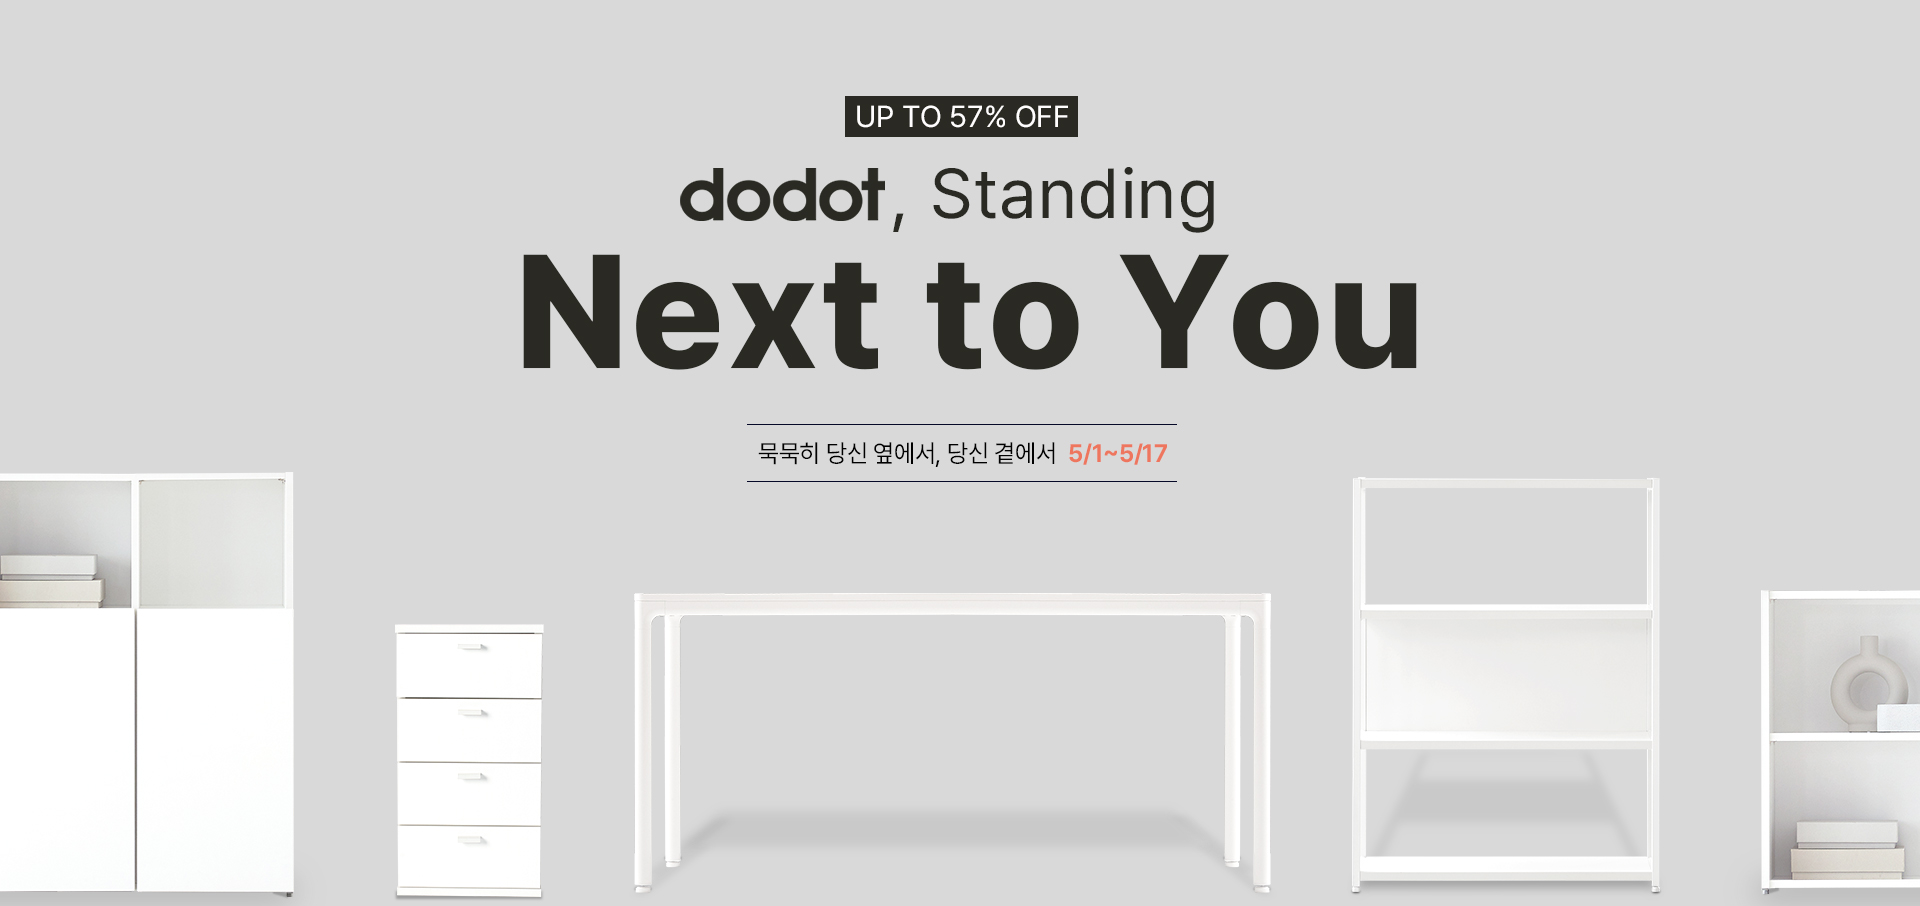 dodot, standing next to you